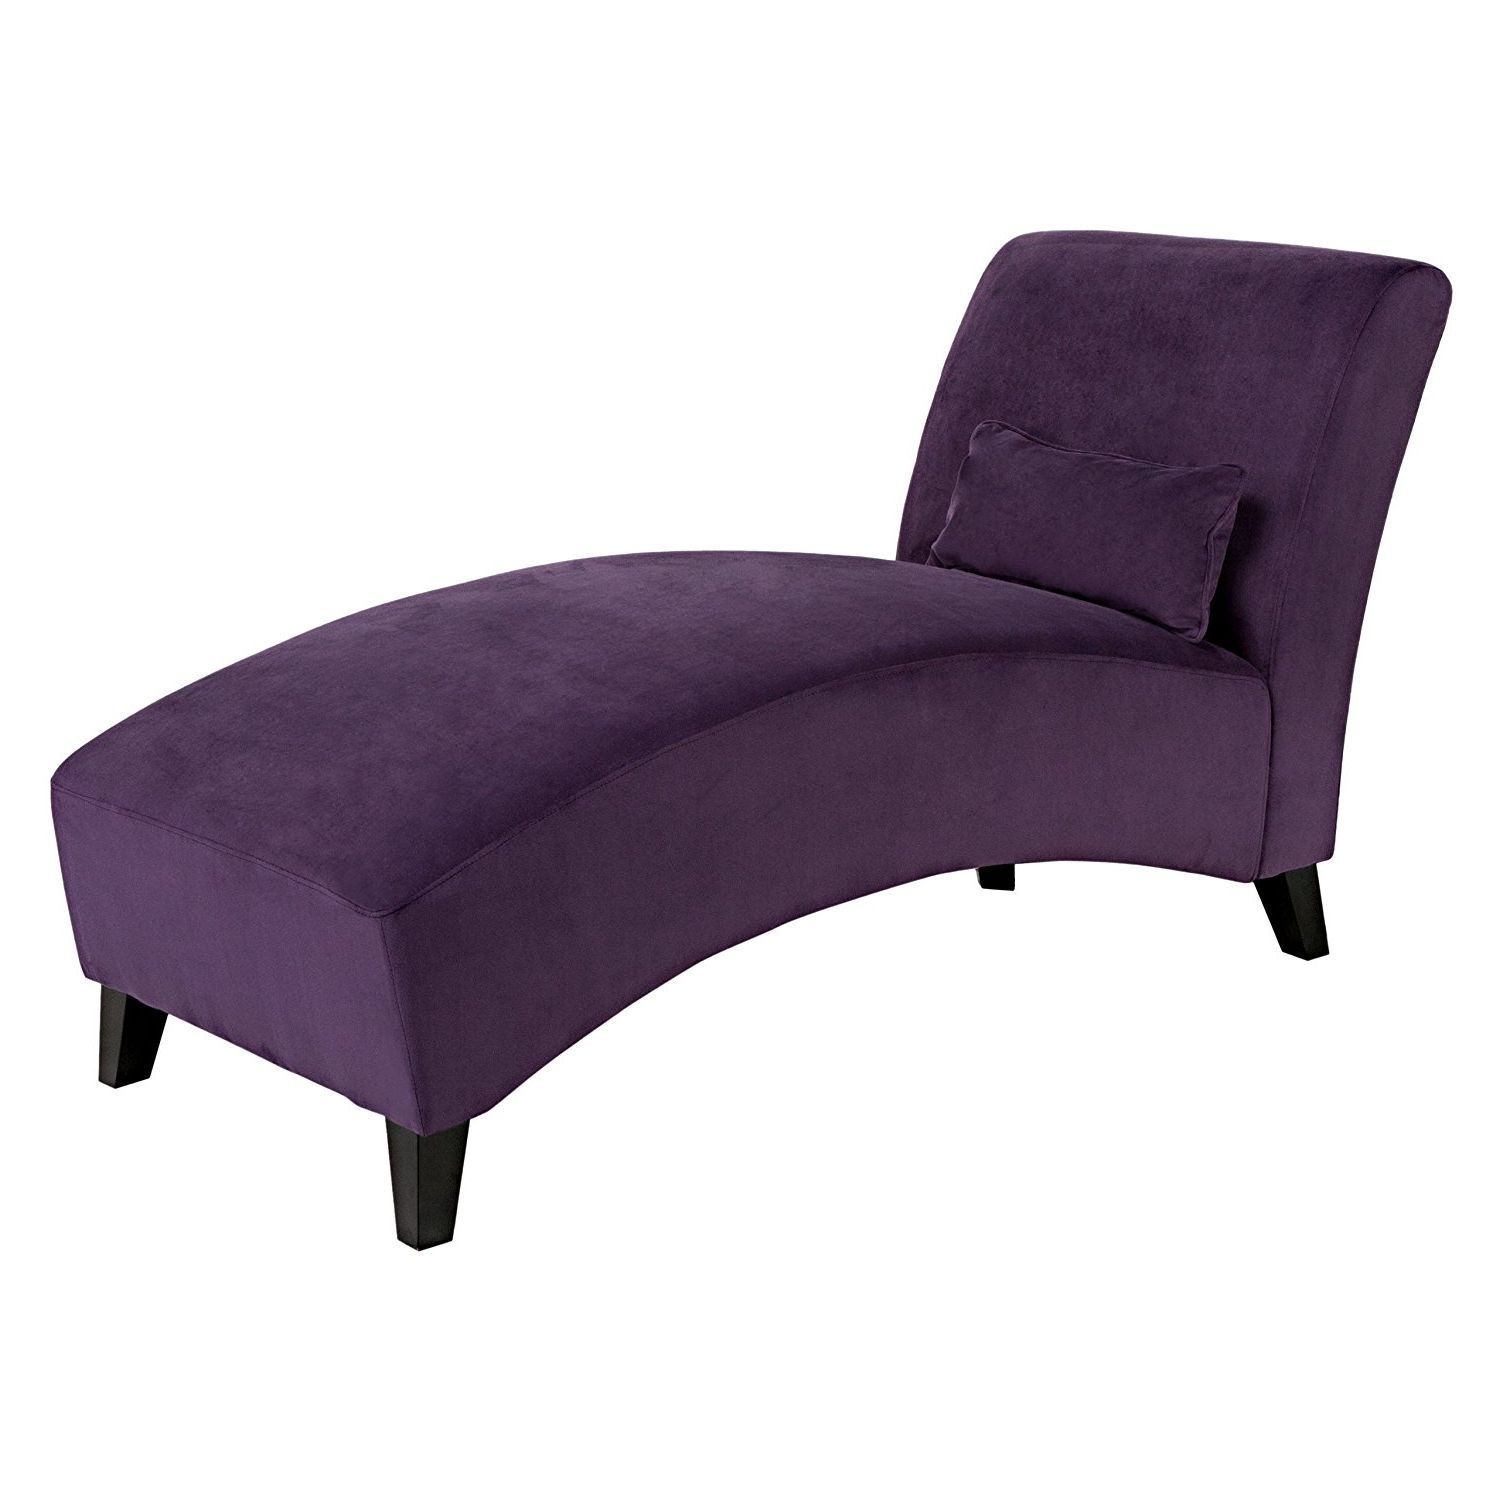 Amazon: Handy Living Chaise Lounge Chair, Purple: Kitchen & Dining Pertaining To 2018 Reclining Chaise Lounges (View 9 of 15)